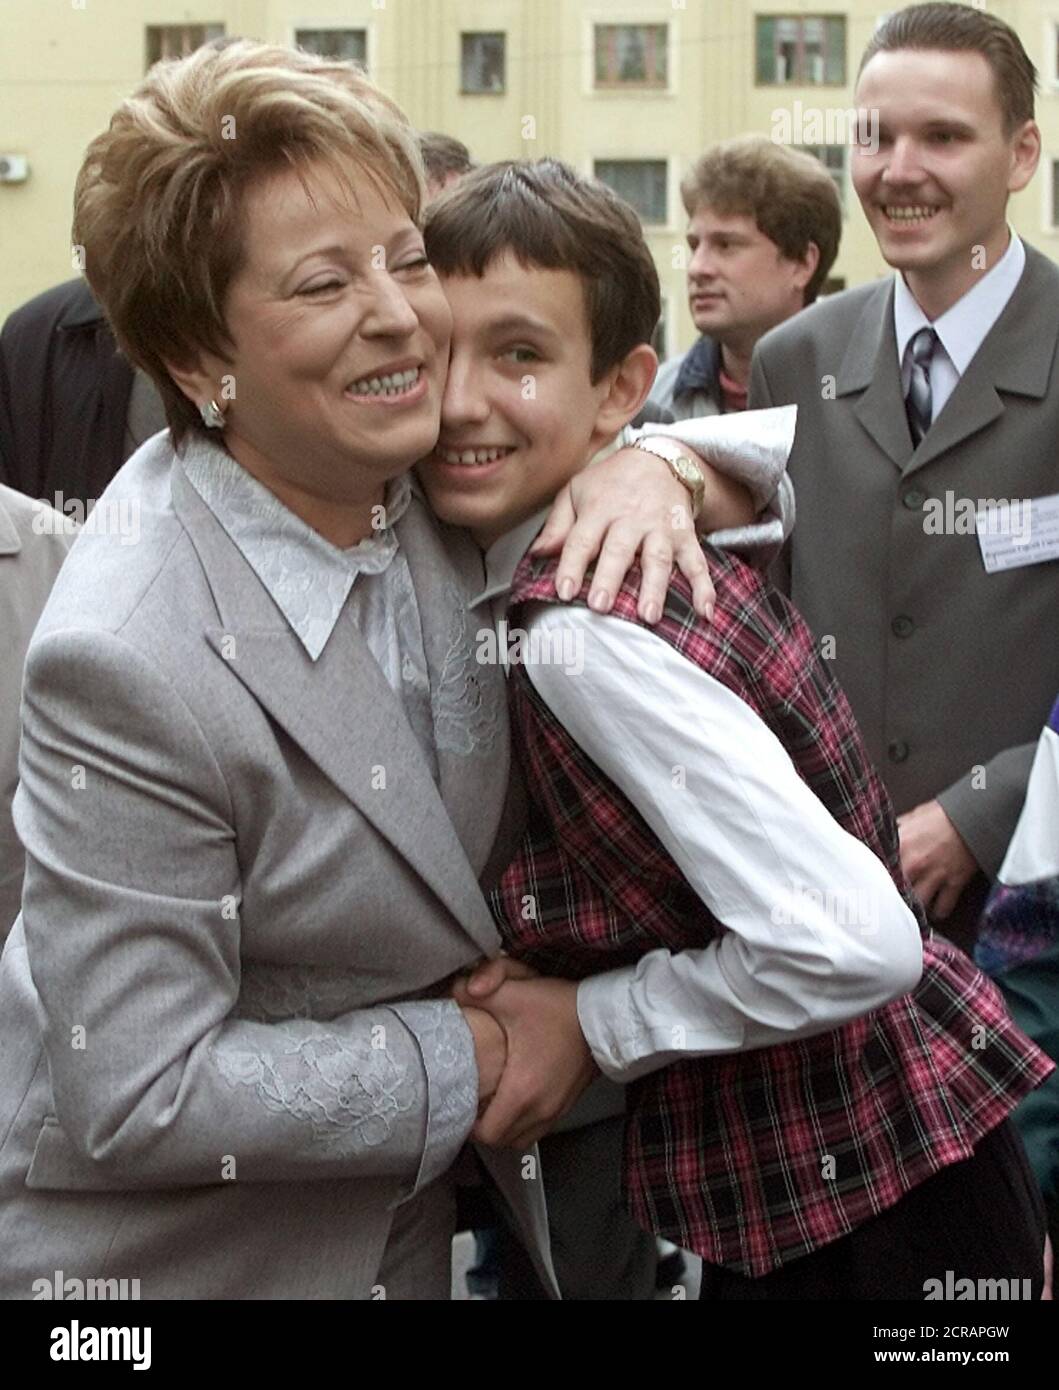 Valentina Matviyenko (L), protegee of President Vladimir Putin, hugs a young supporter after voting in St.Petersburg, October 5, 2003. Matviyenko is heavily favoured to win the gubernatorial election's runoff, but observers fear a low turnout reflecting public disaffection with the democratic process. REUTERS/Alexander Demianchuk  AD/CVI Stock Photo